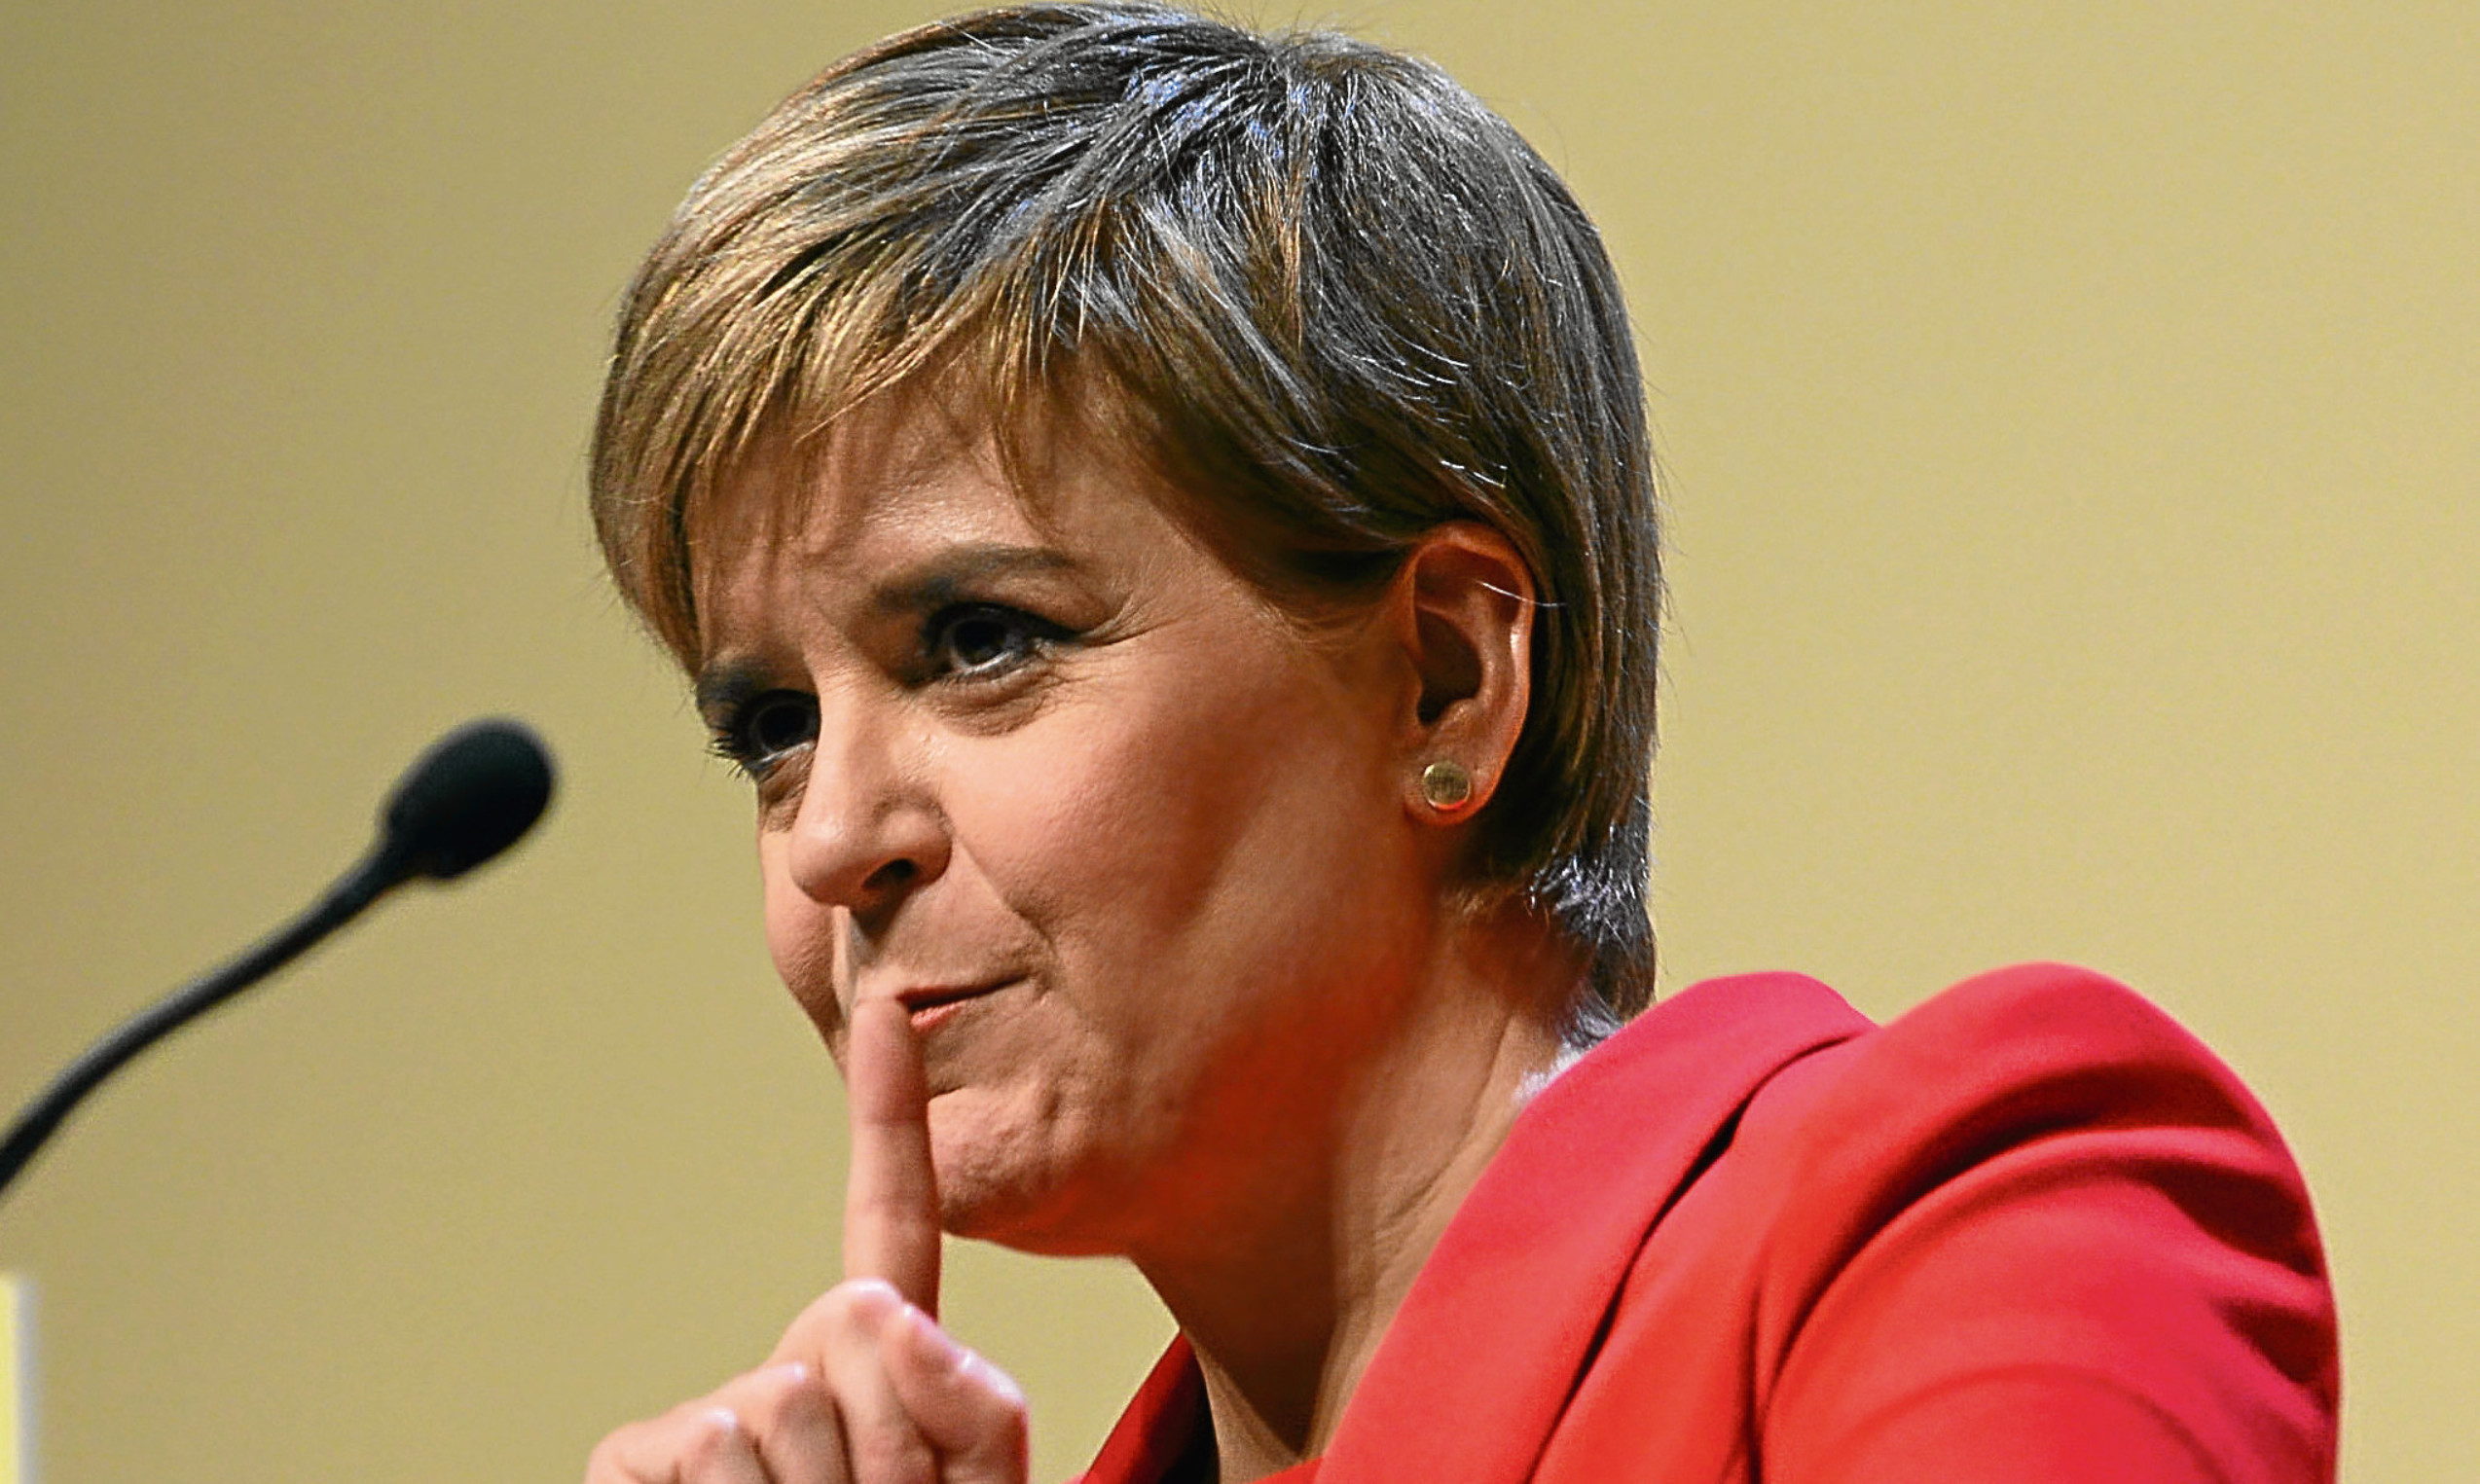 Nicola Sturgeon is to break her silence on her plans for a second independence referendum.